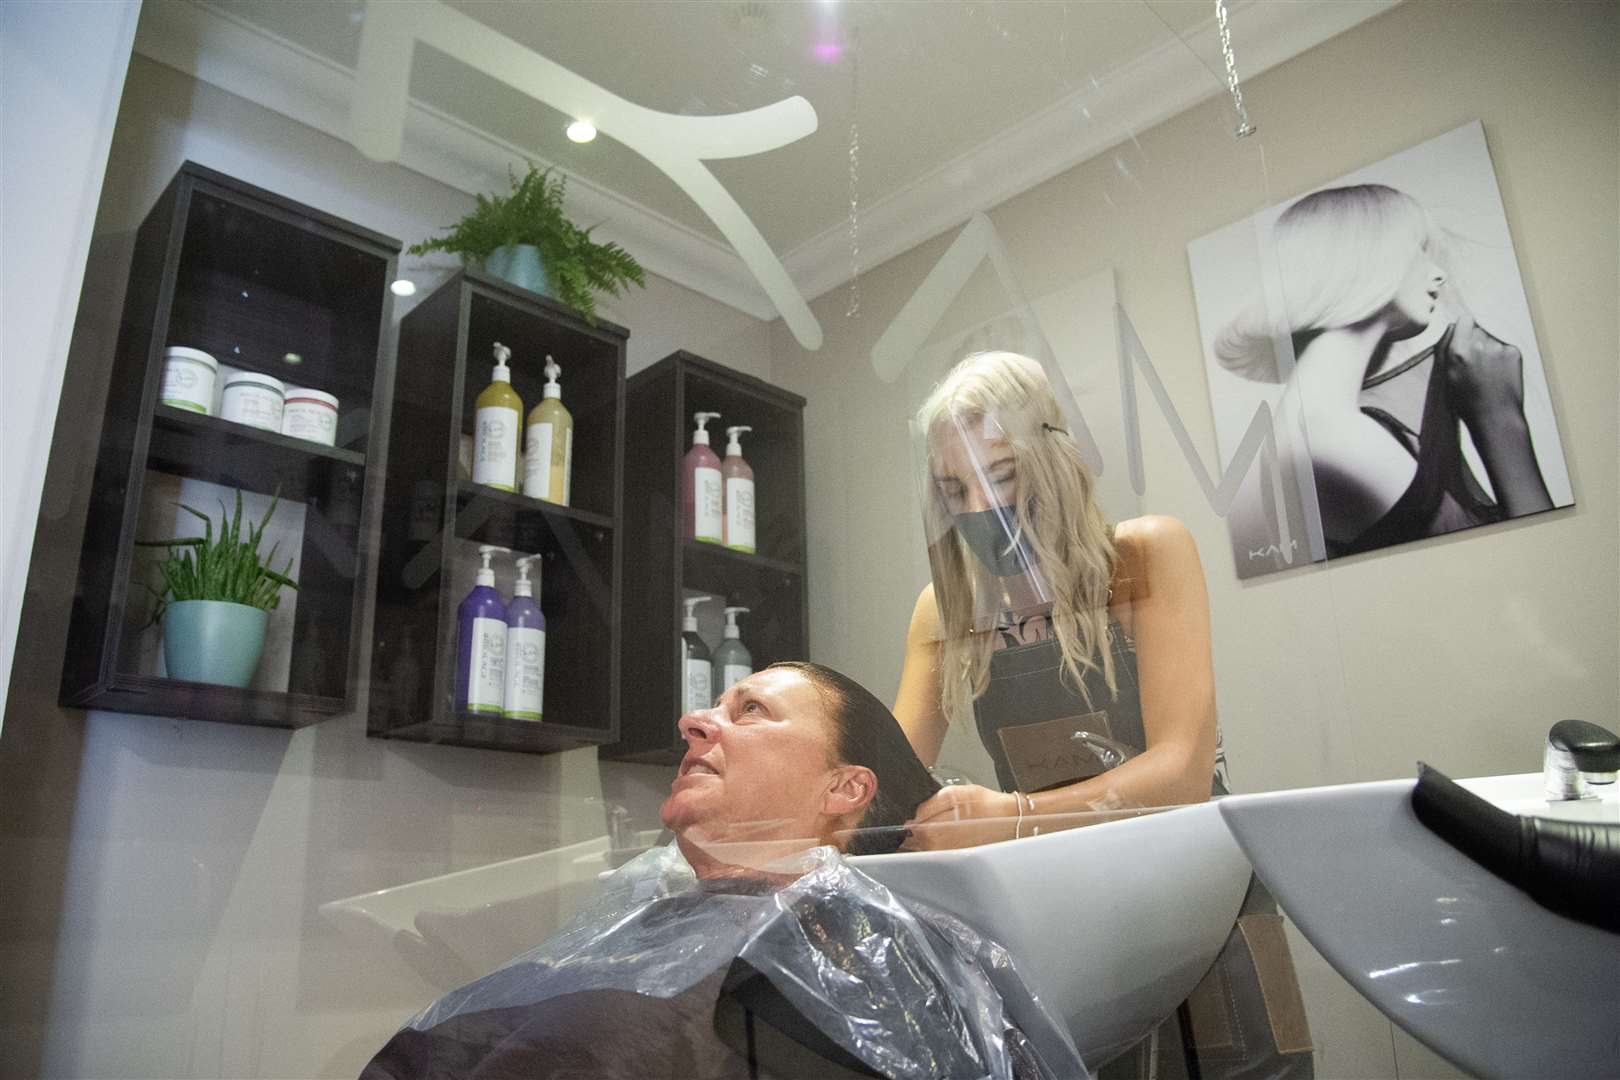 Hairdressing salons can reopen from April 5.